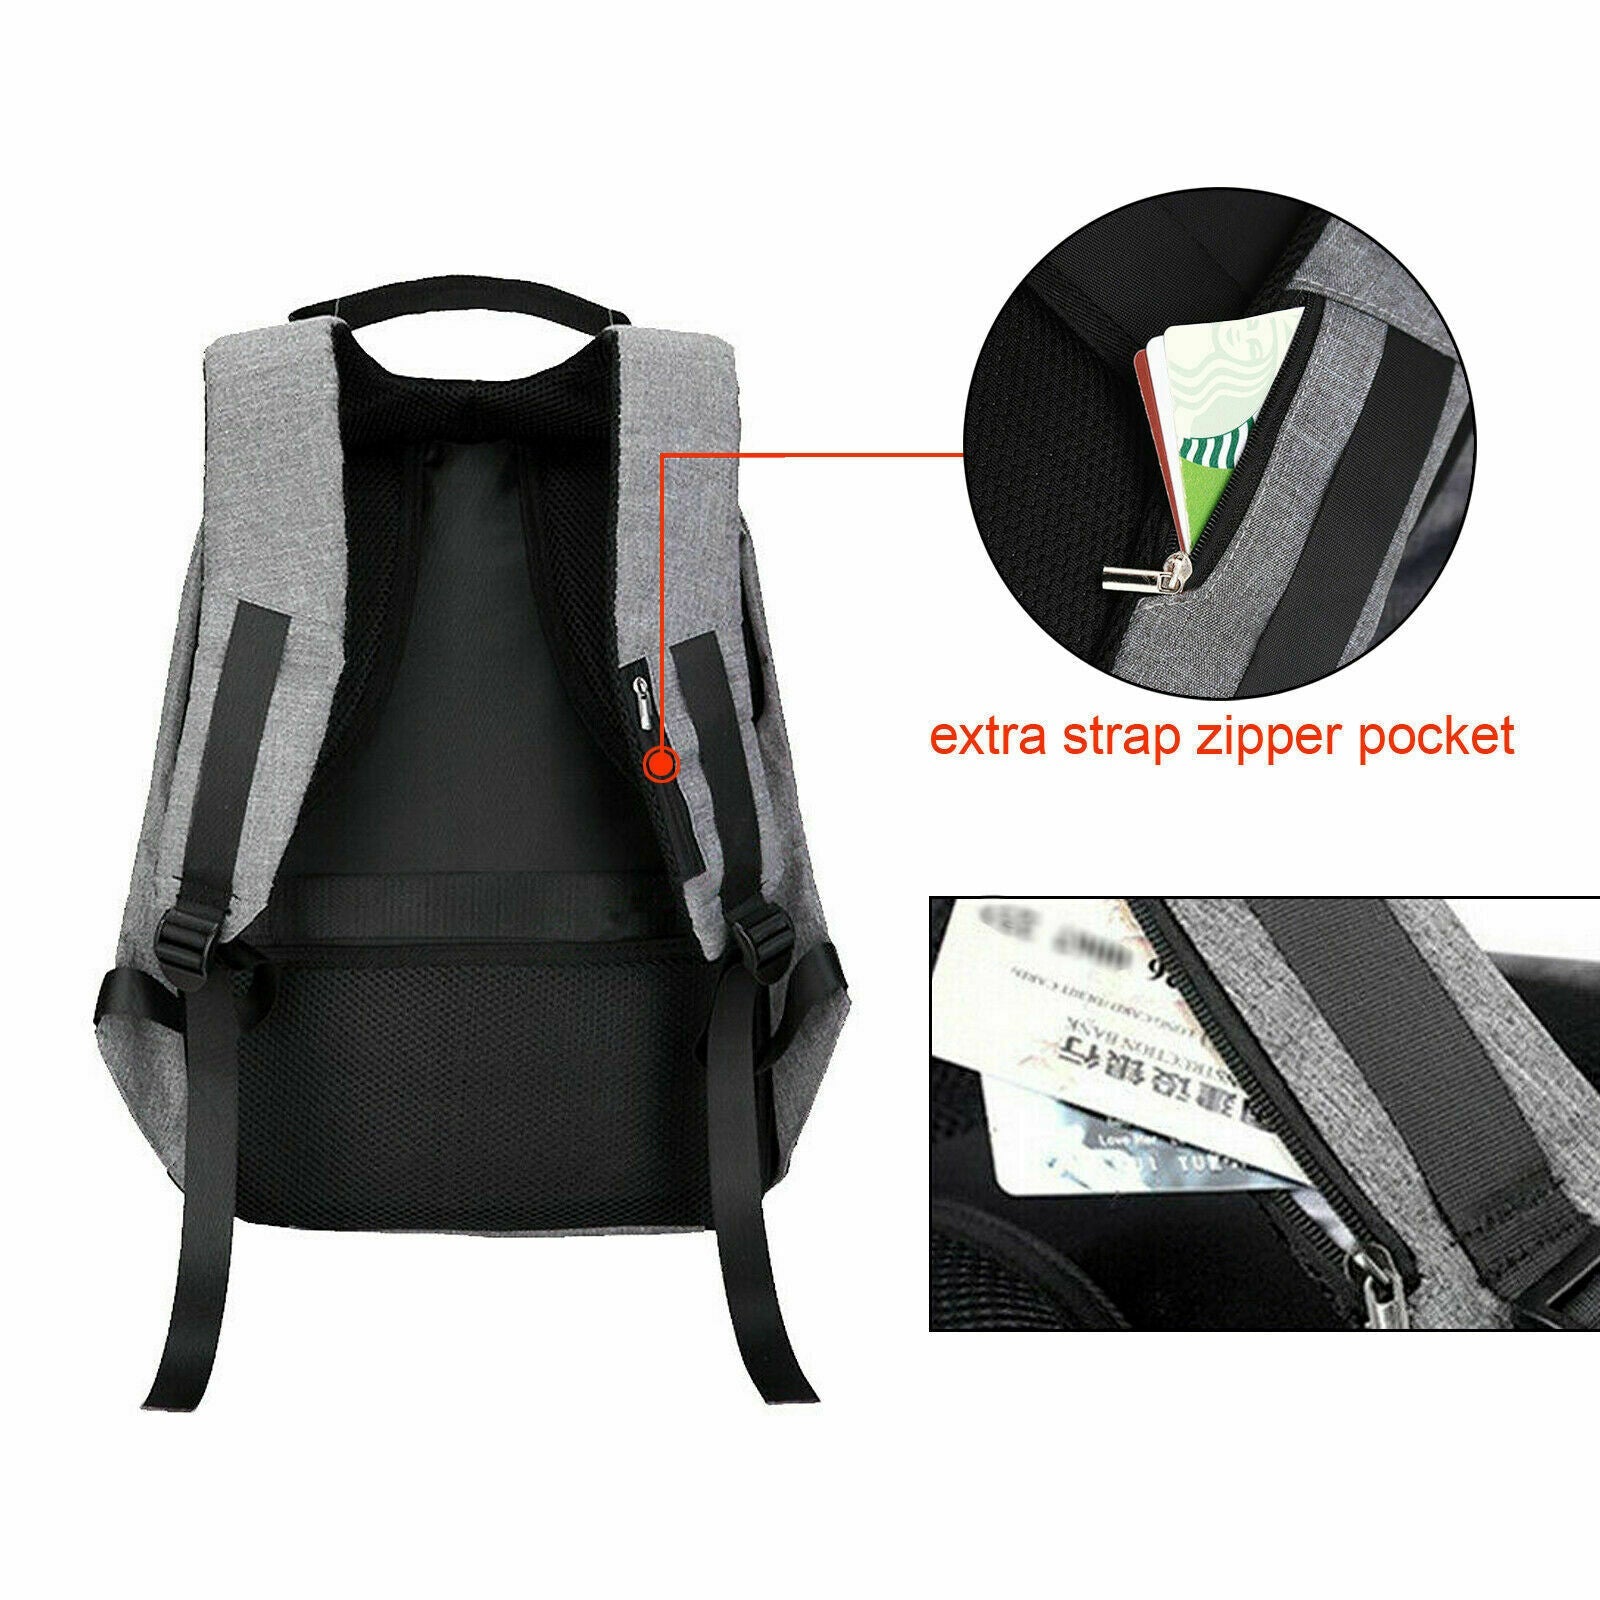 Anti Theft Backpack - Fully Waterproof - Perfect as Laptop Case